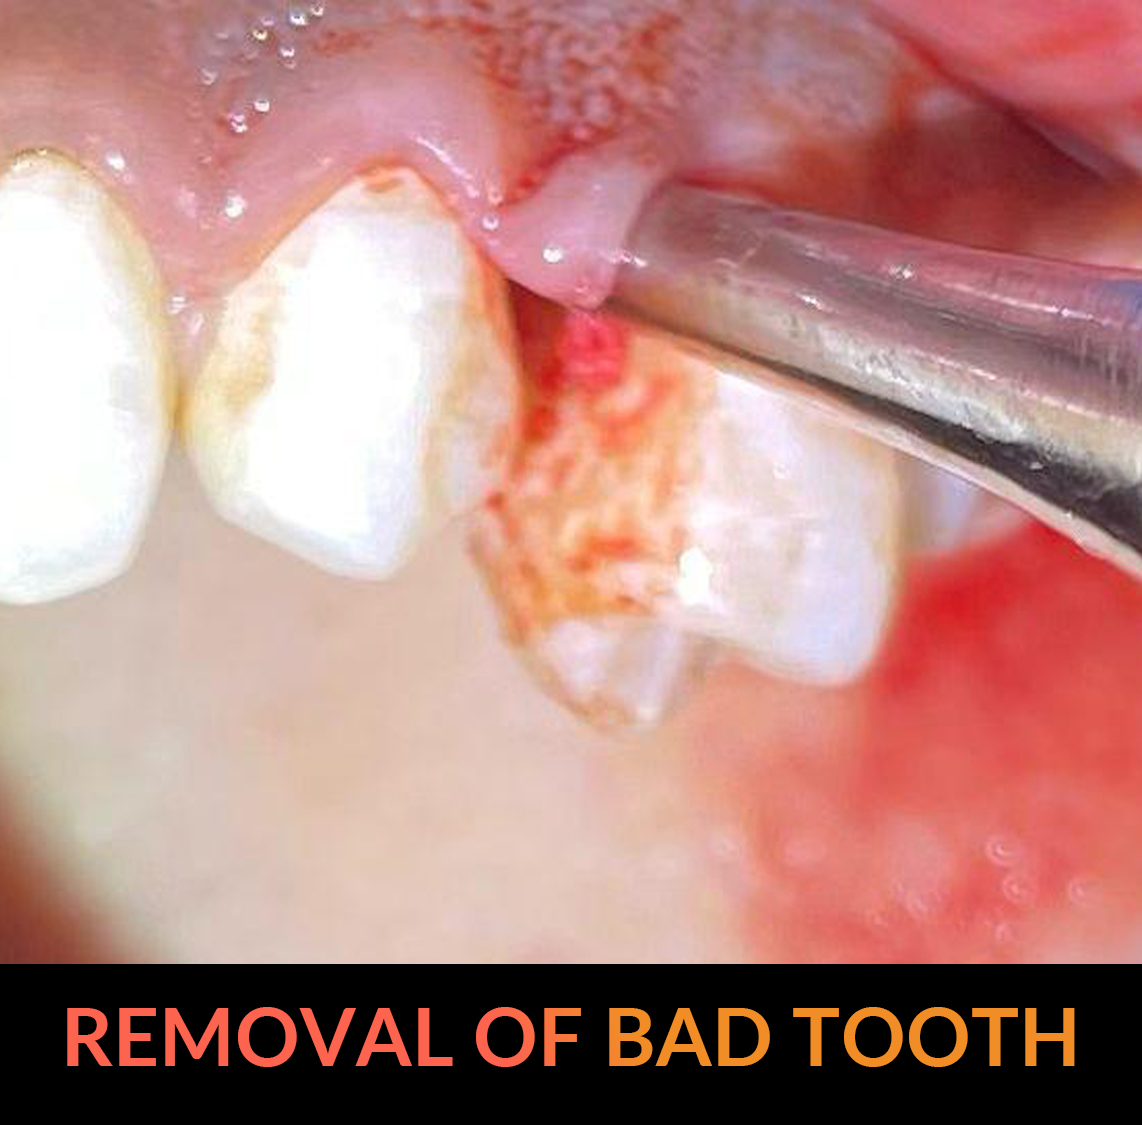 Removal of bad tooth